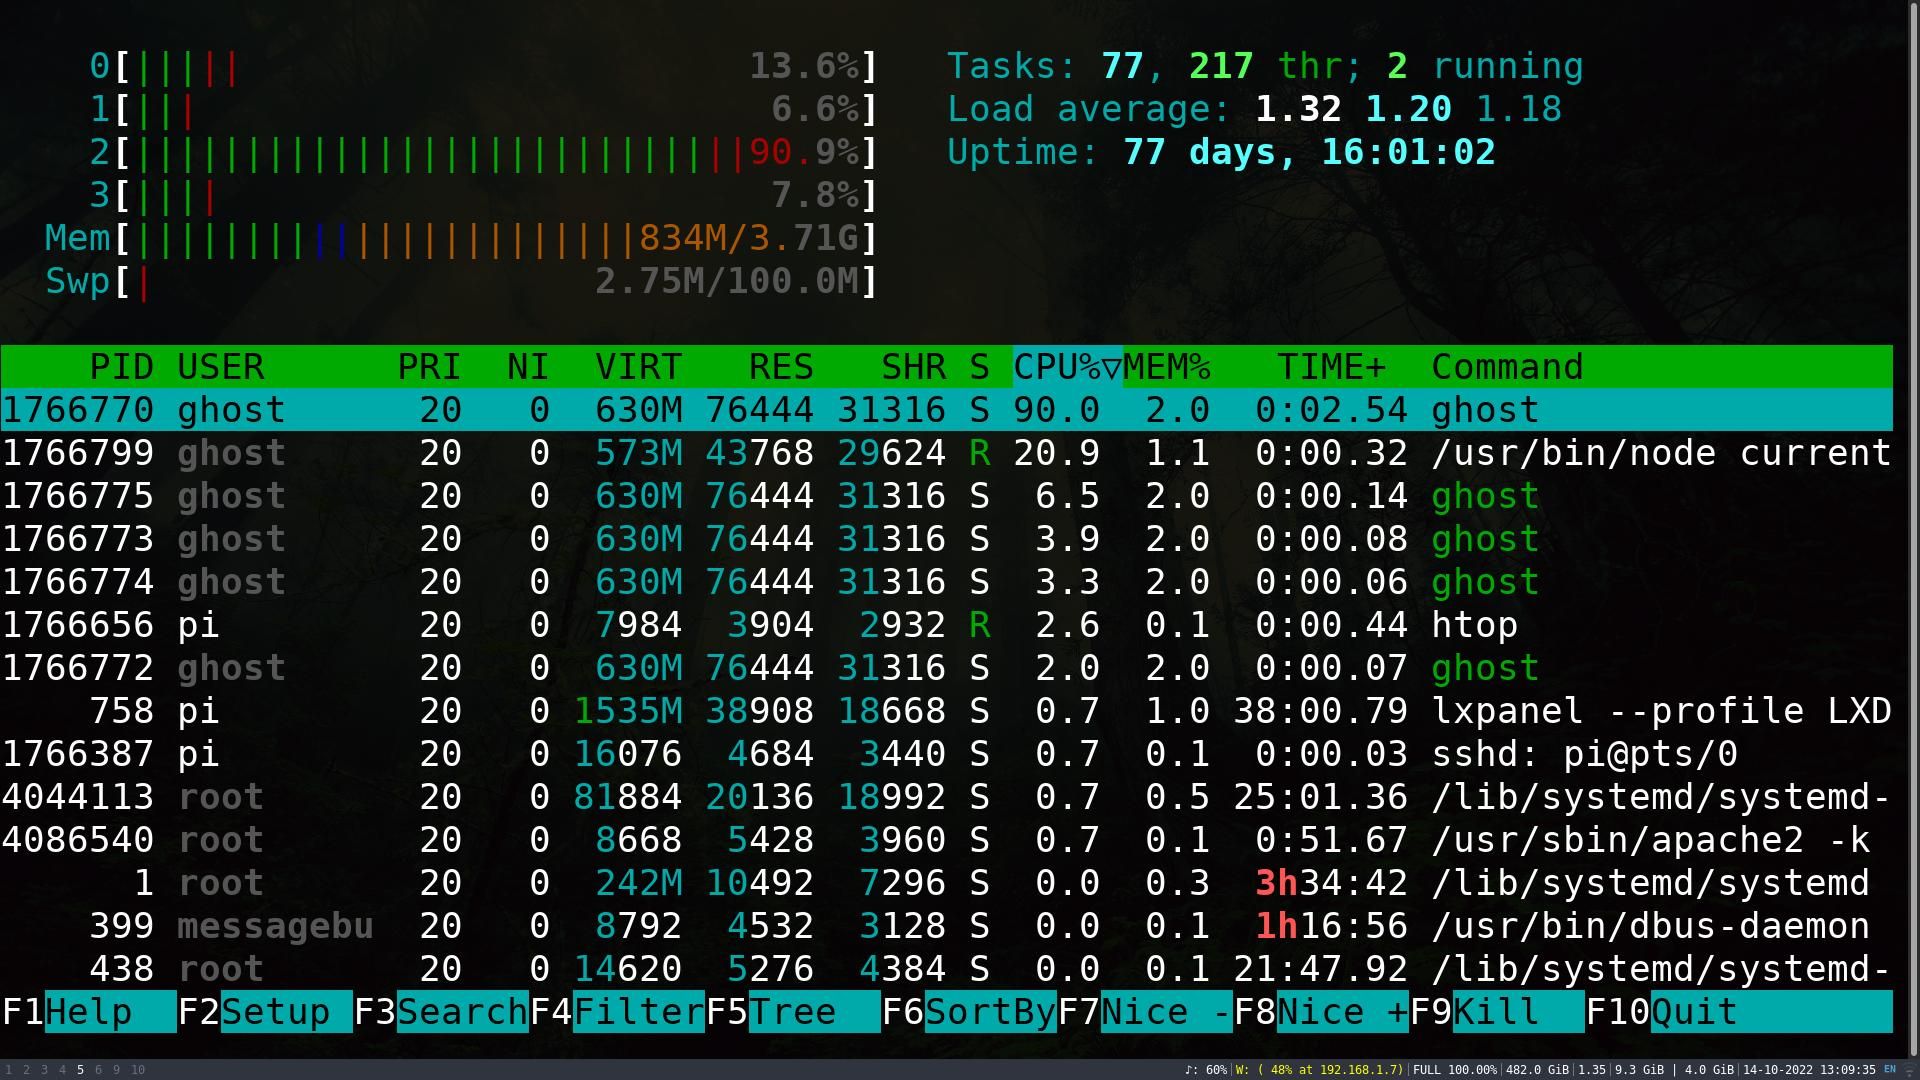 htop showing an uptime of 77 days